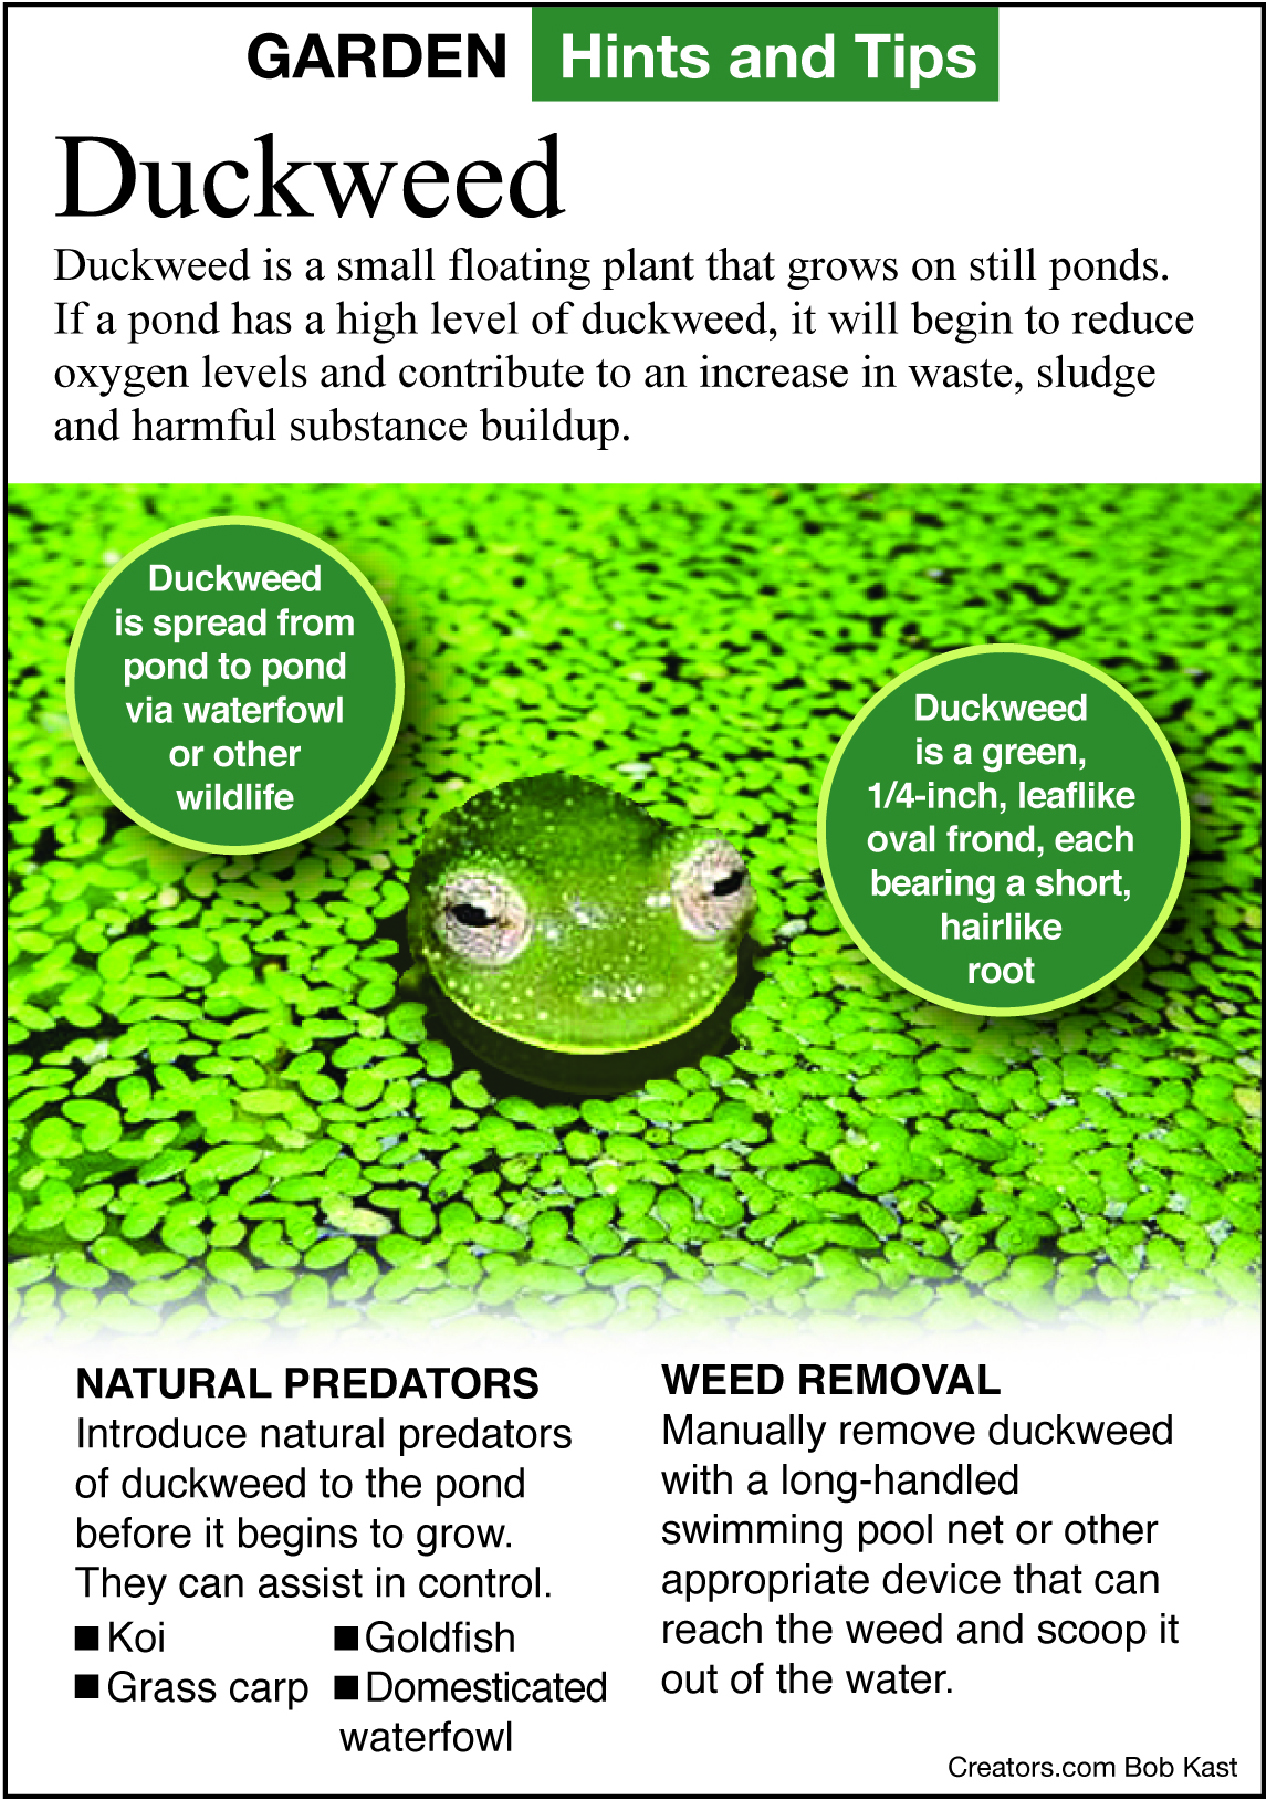 Gardening Duckweed Has Its Positives Negatives For Ponds But Can Be Controlled Indianapolis Business Journal